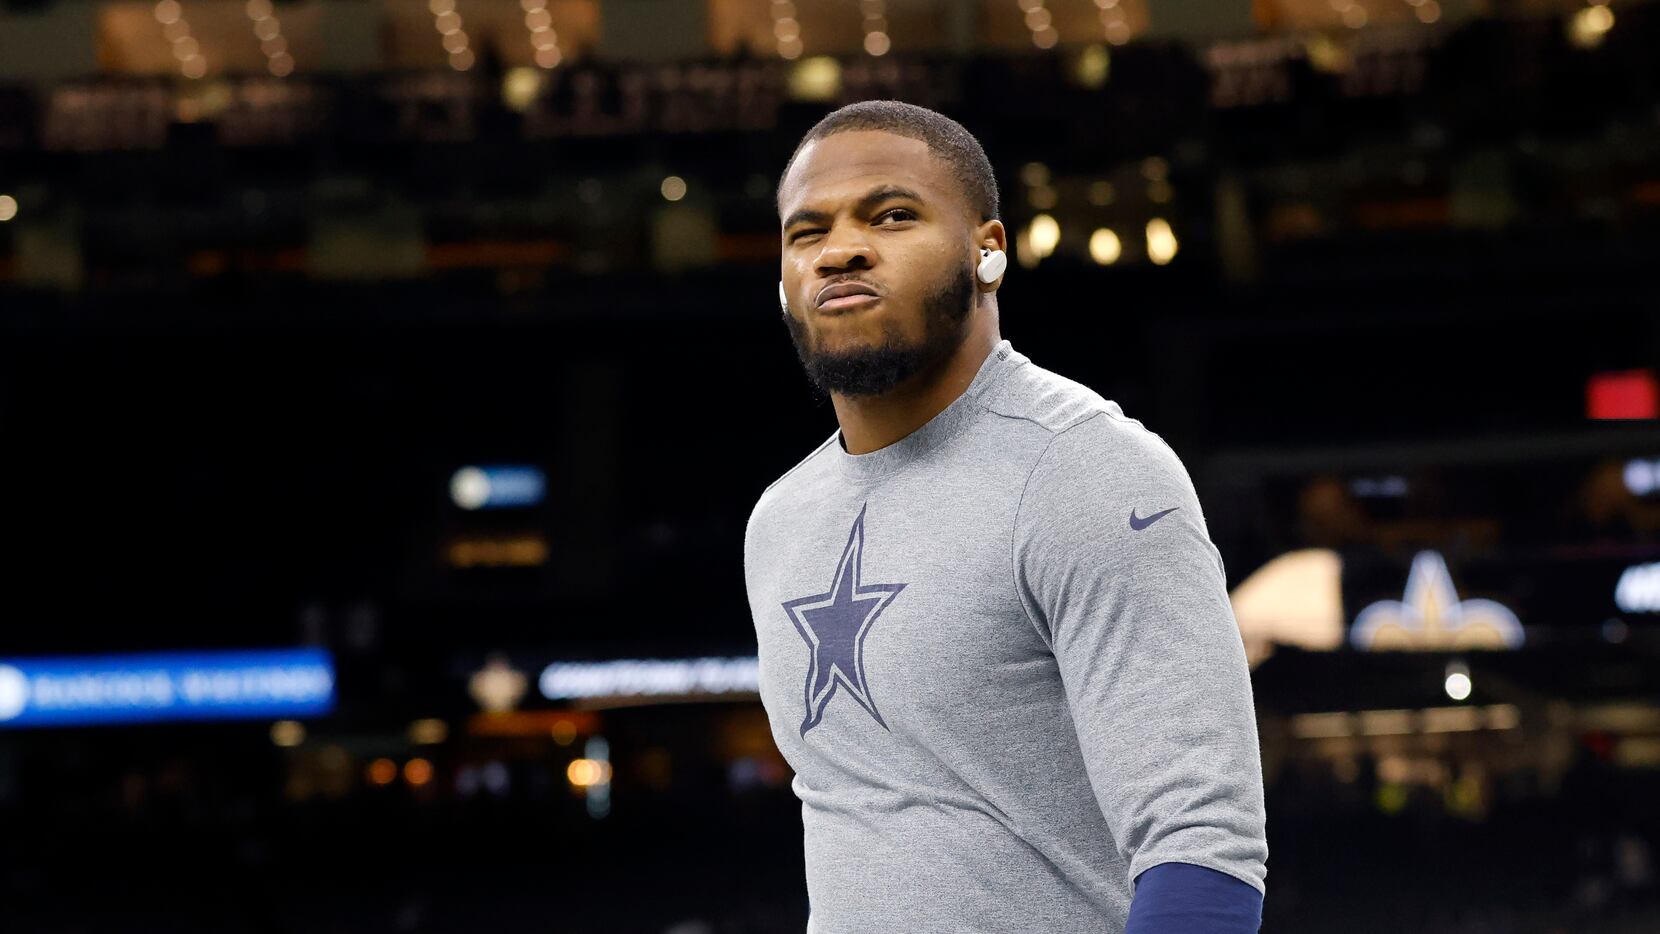 Micah Parsons on what went wrong in Cowboys' playoff loss, his